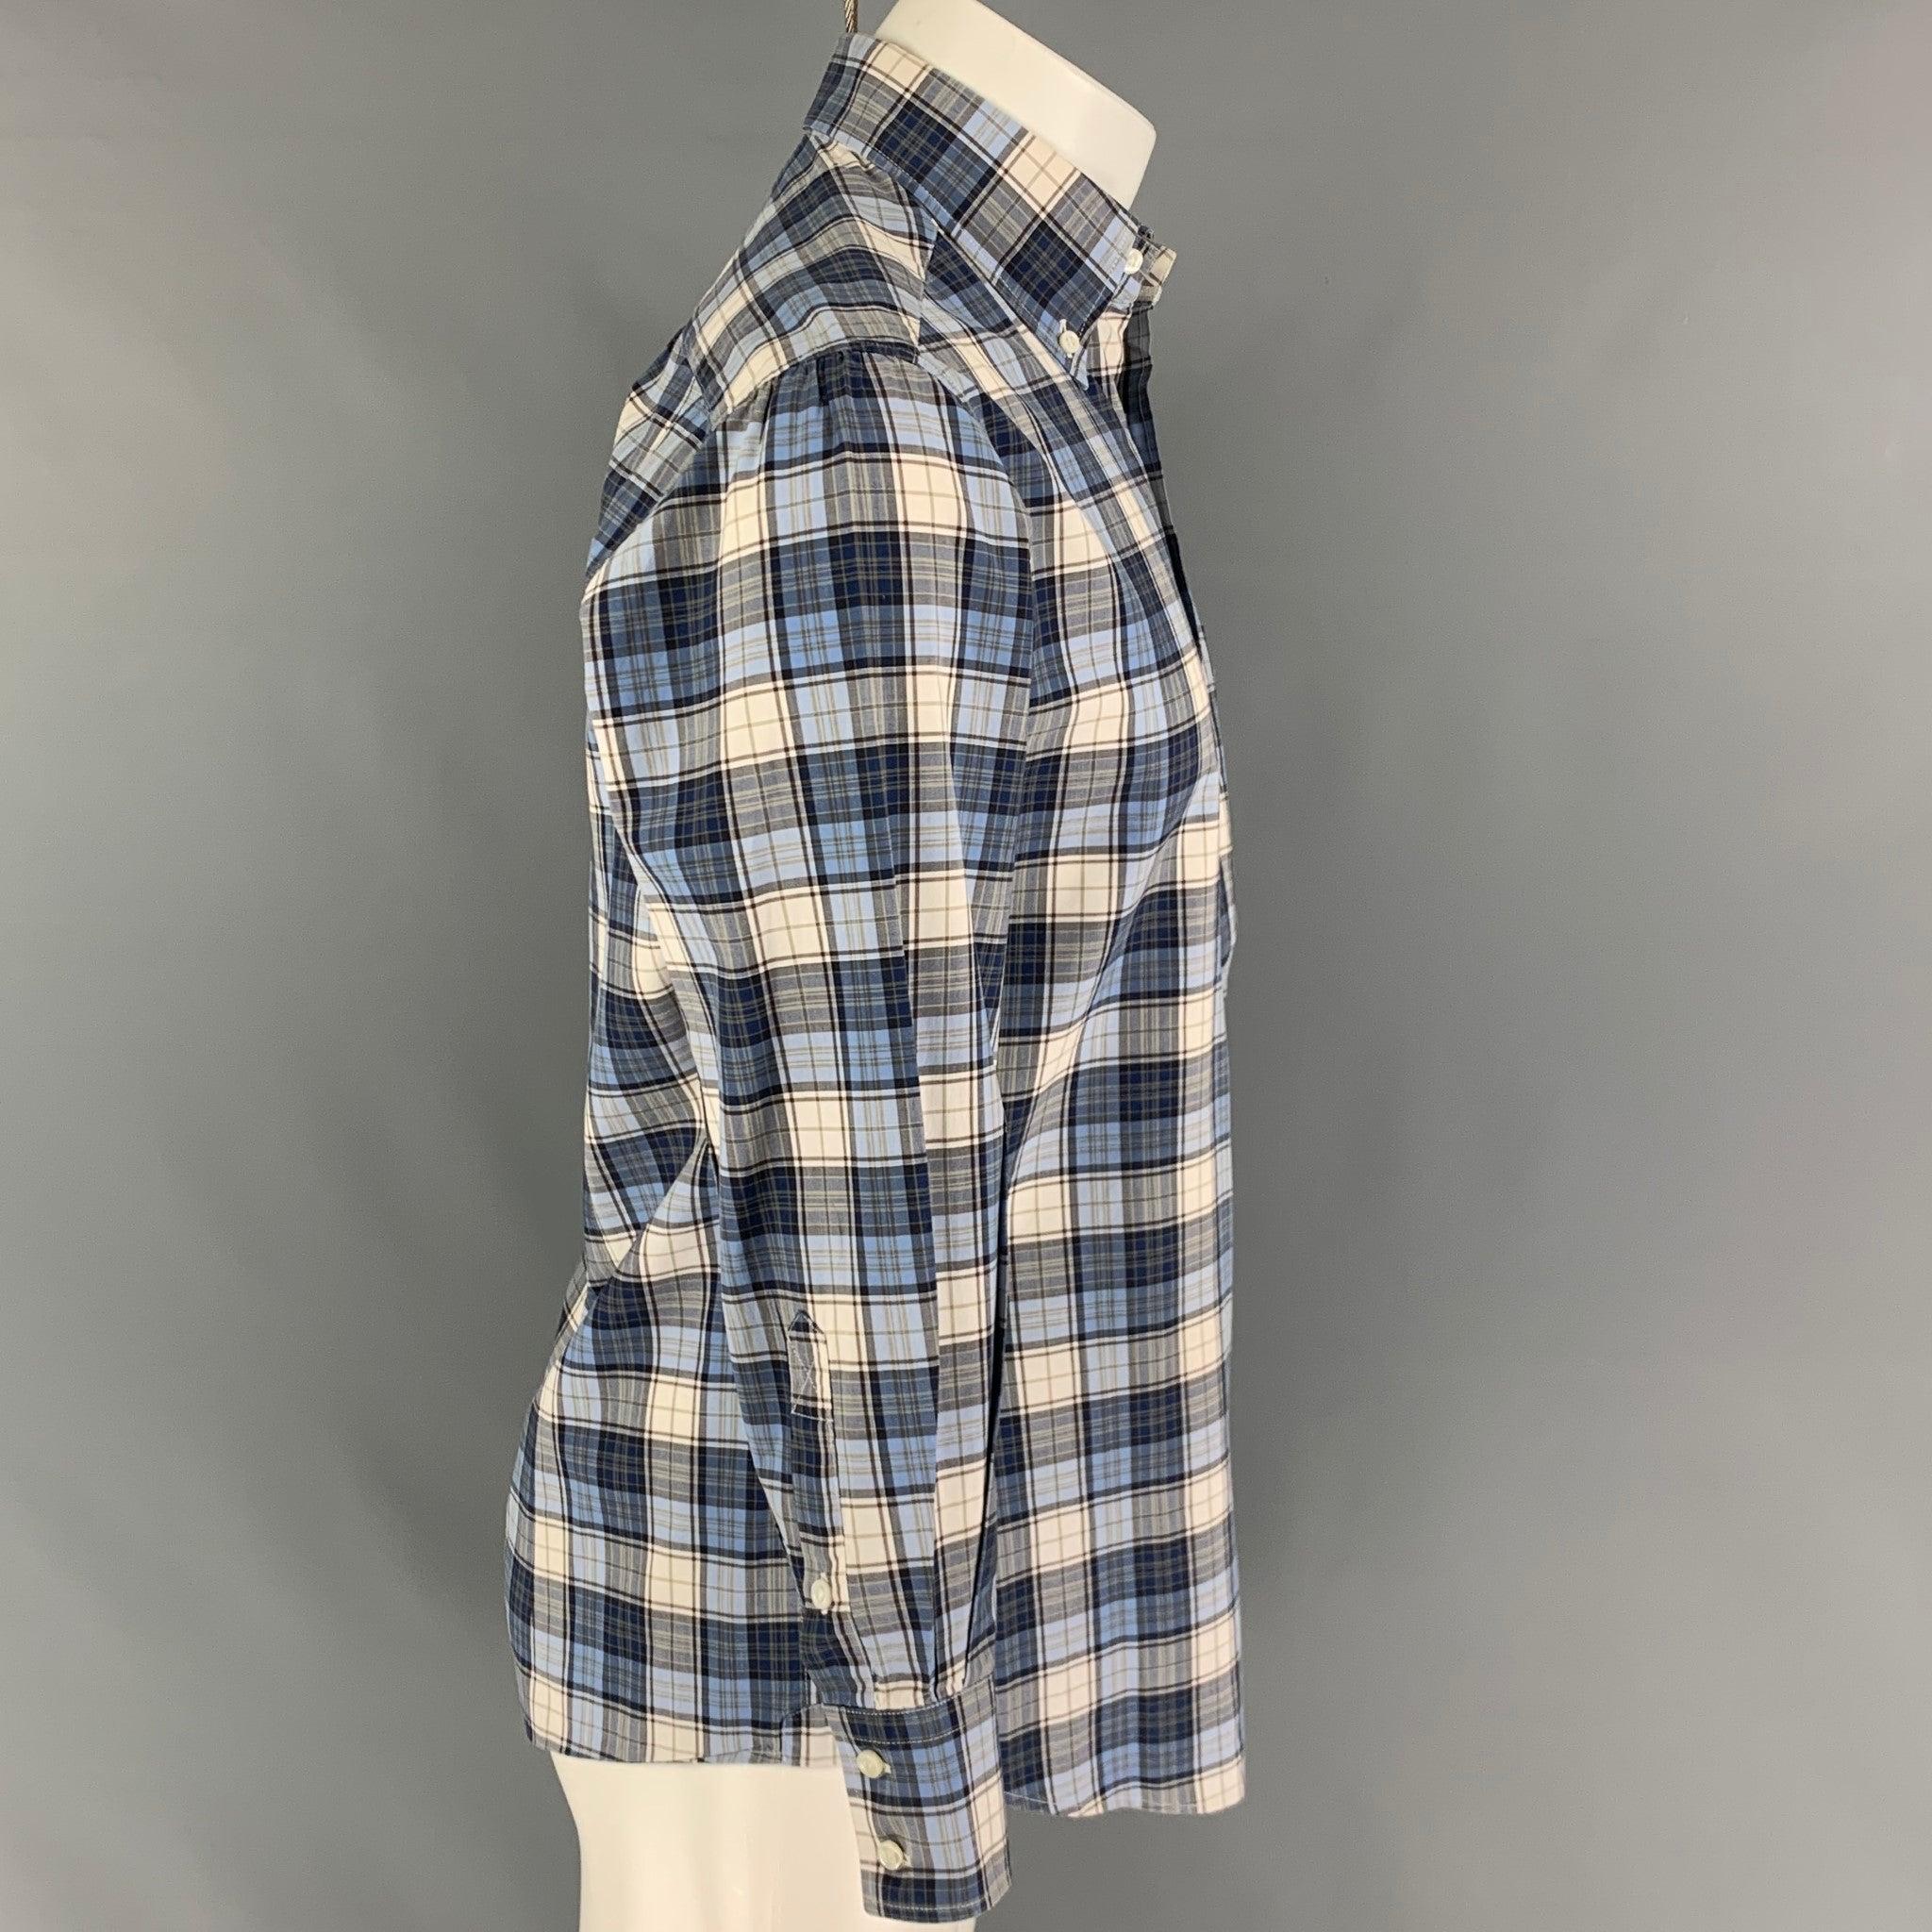 BRUNELLO CUCINELLI long sleeve shirt comes in a blue & navy plaid cotton button down collar, patch pocket, and a button down collar. Made in Italy.
Very Good
Pre-Owned Condition.  

Marked:   S 

Measurements: 
 
Shoulder: 18 inches  Chest: 40